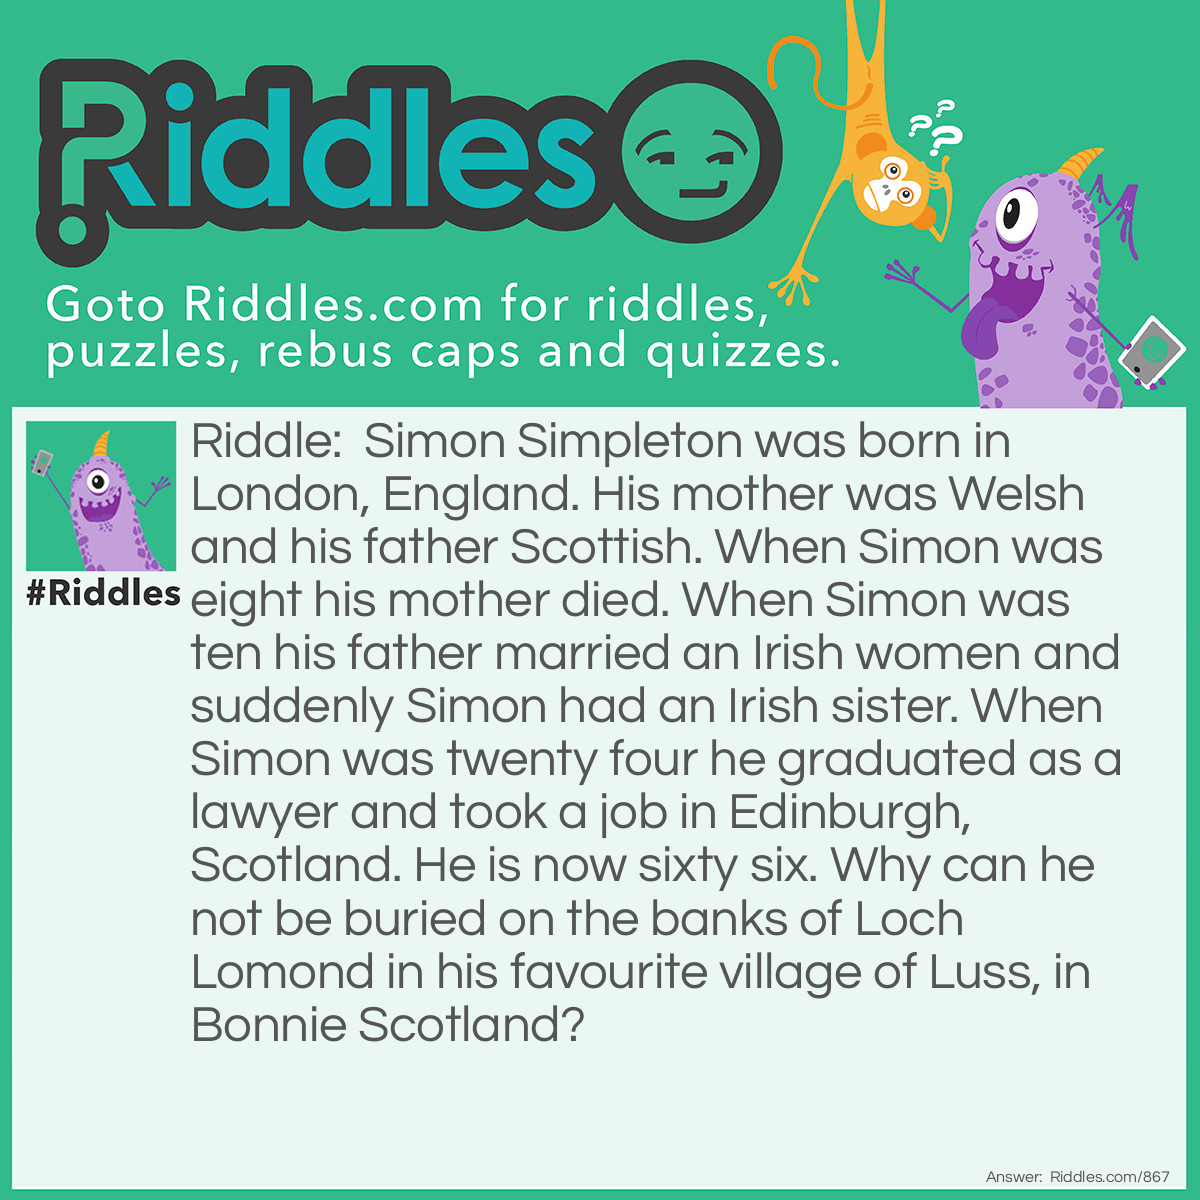 Riddle: Simon Simpleton was born in London, England. His mother was Welsh and his father Scottish. When Simon was eight his mother died. When Simon was ten his father married an Irish women and suddenly Simon had an Irish sister. When Simon was twenty four he graduated as a lawyer and took a job in Edinburgh, Scotland. He is now sixty six. Why can he not be buried on the banks of Loch Lomond in his favourite village of Luss, in Bonnie Scotland? Answer: Because he is still alive!